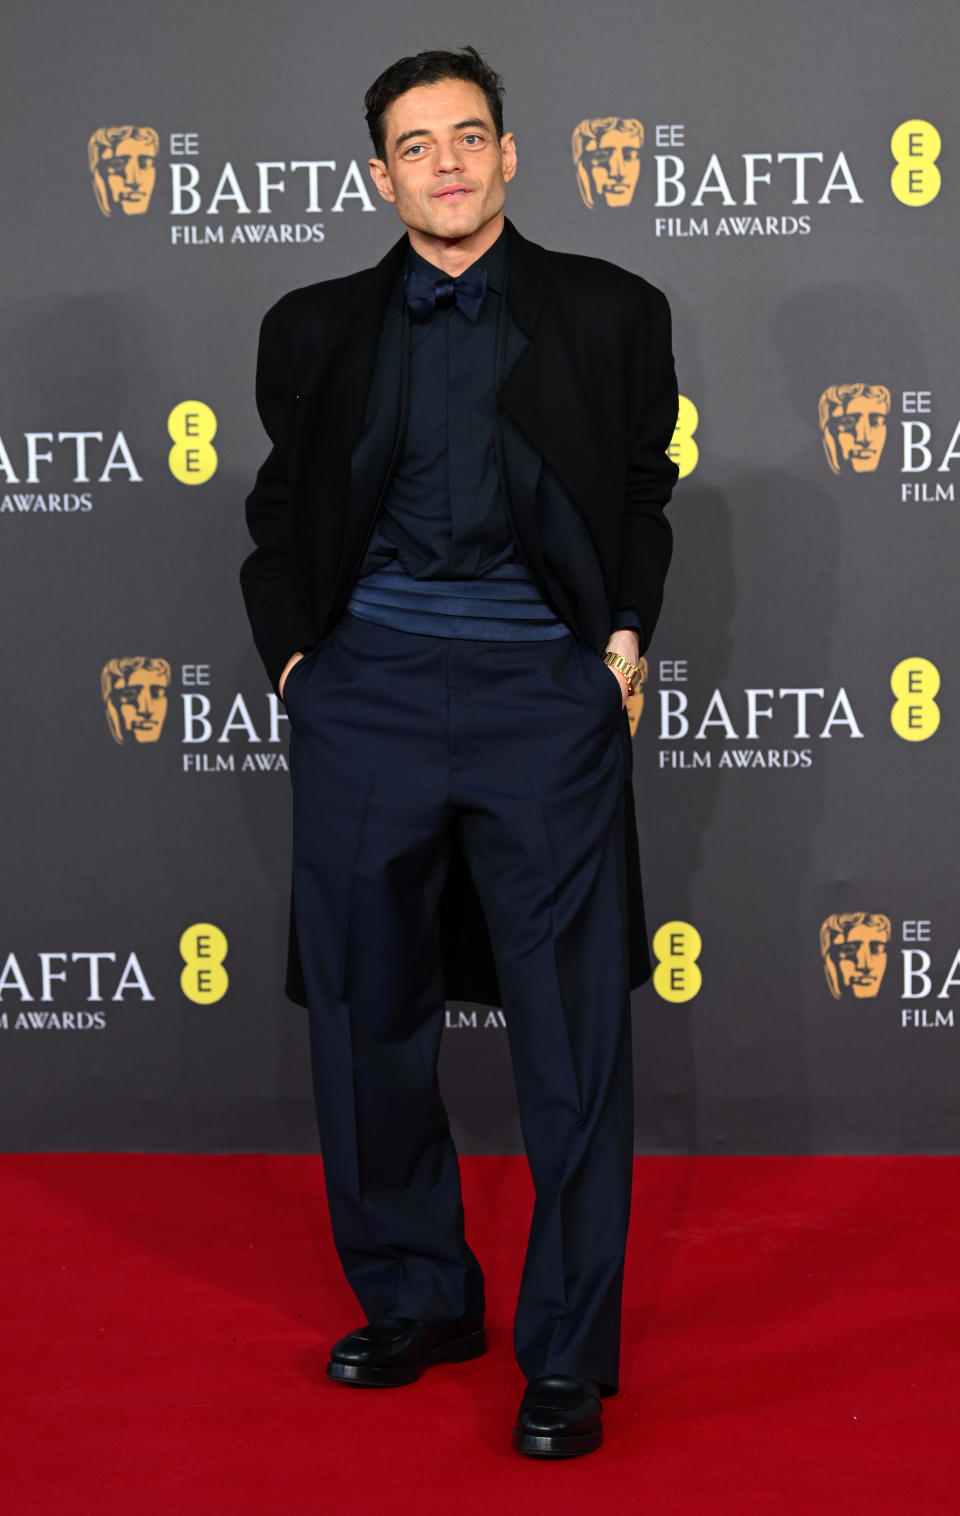 Rami Malek in a black suit with bow tie at the BAFTA Film Awards